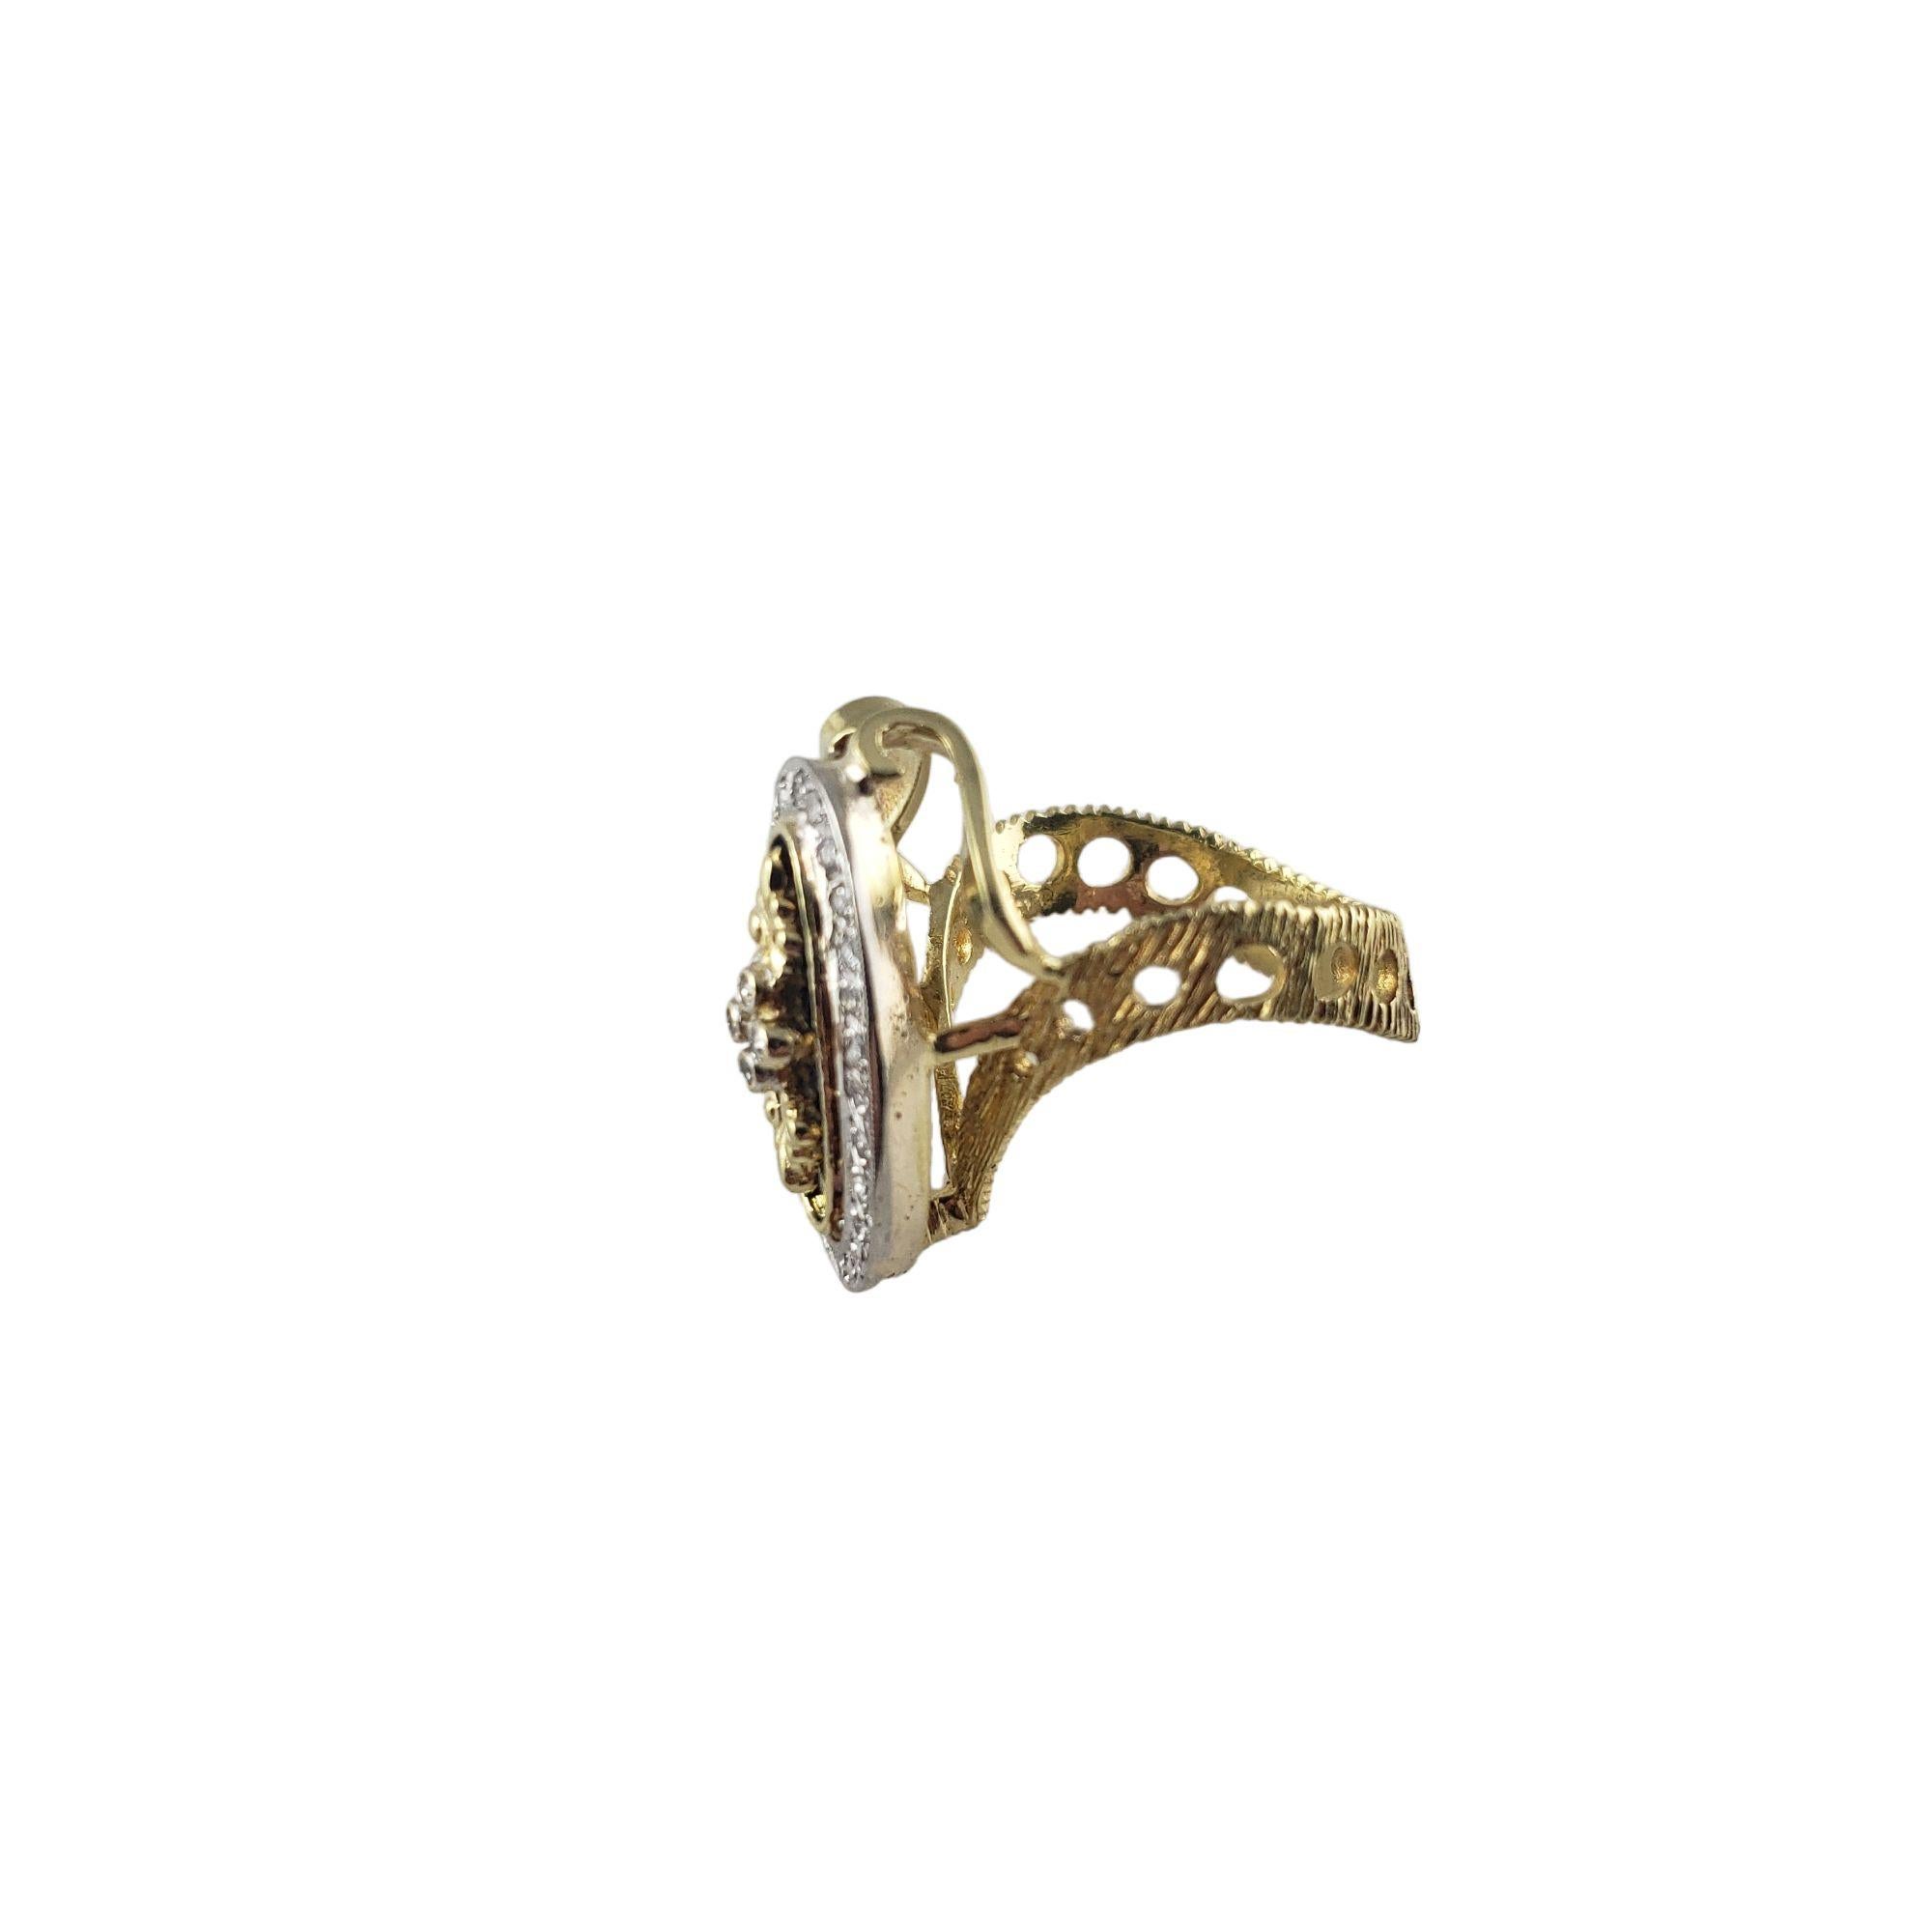 Vintage 18 Karat Yellow Gold and Diamond Ring Size 8

This lovely ring features 28 round single cut diamonds set in beautifully detailed 18K yellow gold. Top of ring measures
24 mm x 11 mm. Shank: 6 mm.

Approximate total diamond weight: .30